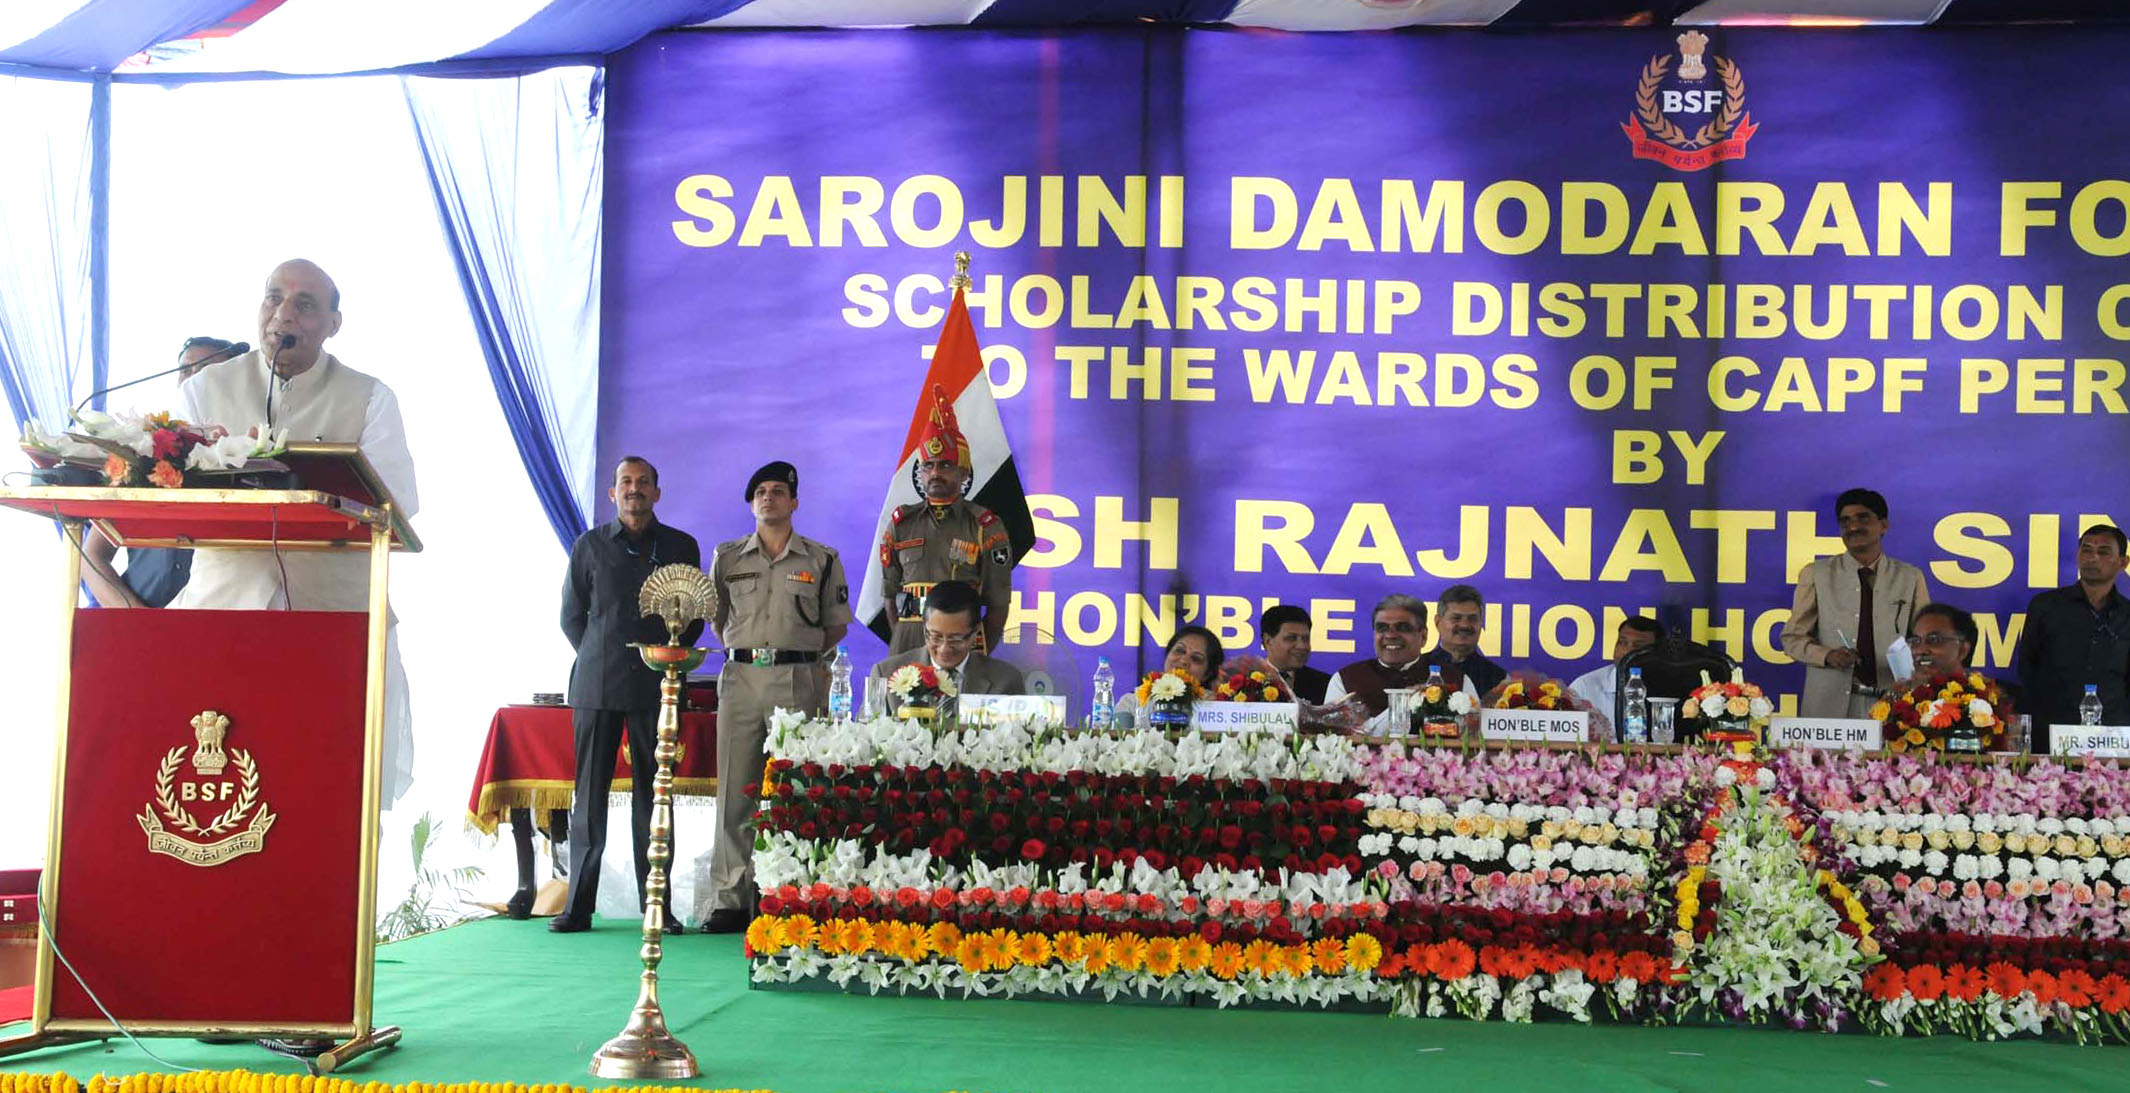 The Union Home Minister, Shri Rajnath Singh addressing at Sarojini Damodaran Foundation Scholarship distribution ceremony, in New Delhi on March 18, 2016. 	The Minister of State for Home Affairs, Shri Haribhai Parthibhai Chaudhary and other dignitaries are also seen.